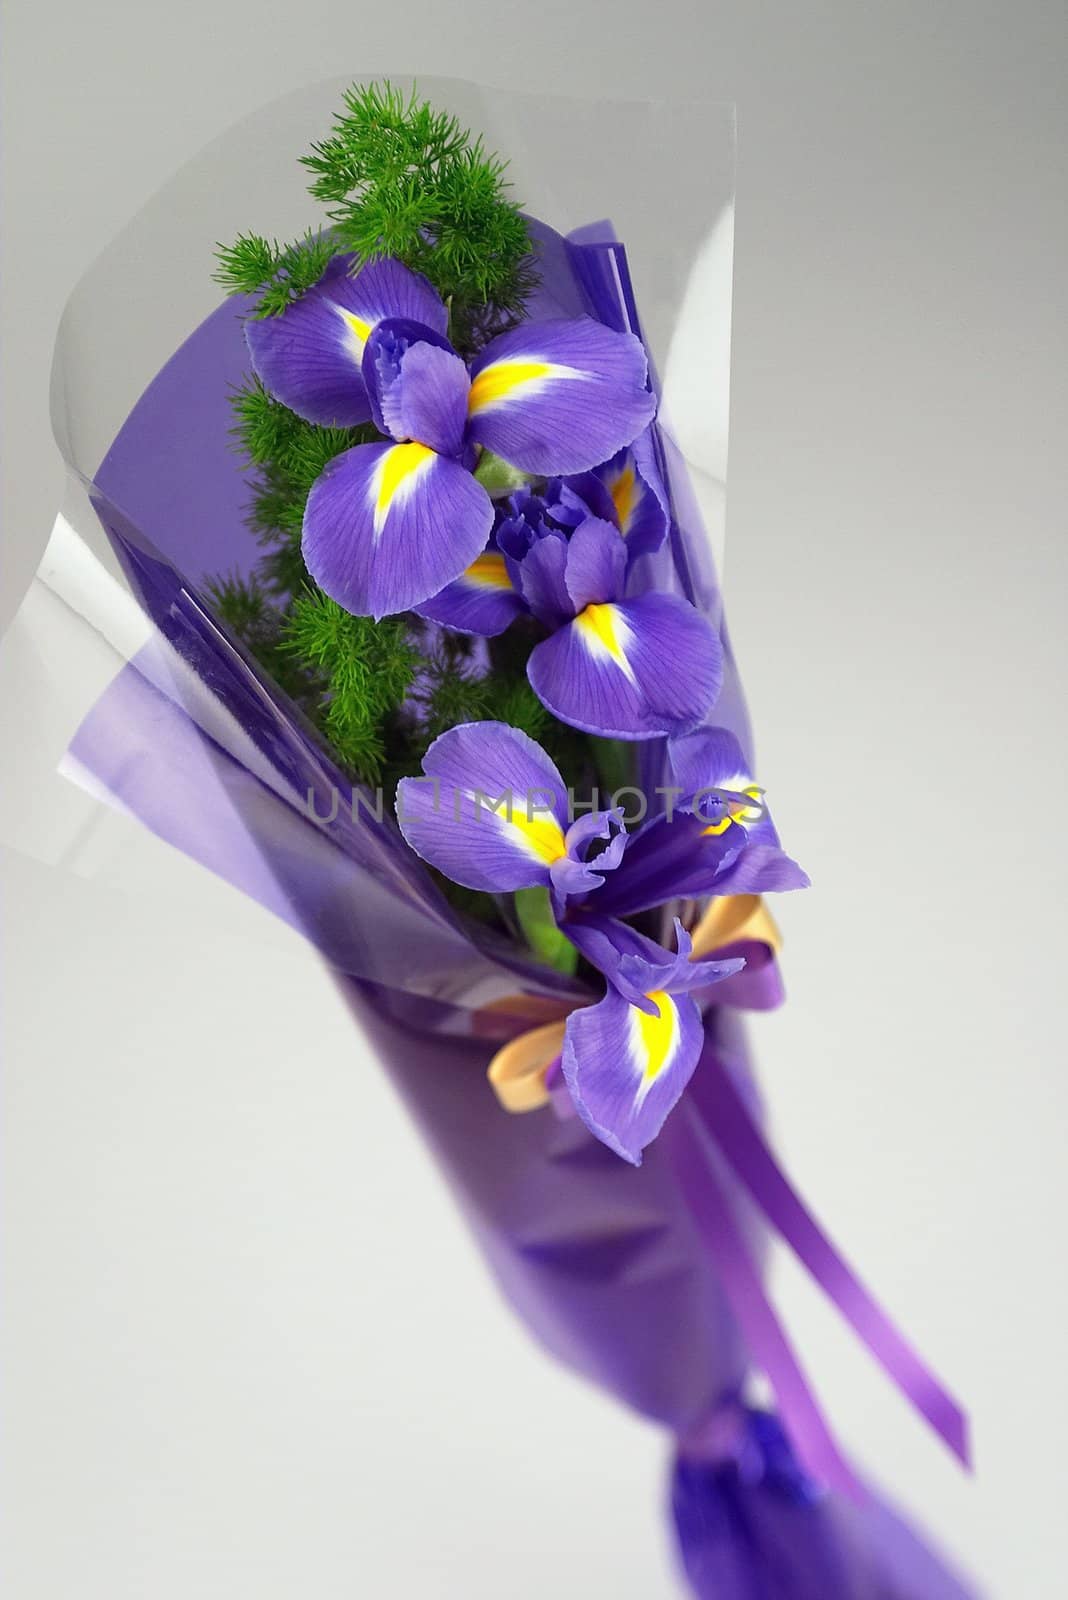 Details of beautiful bouquet of purple flowers, isolated on white background.